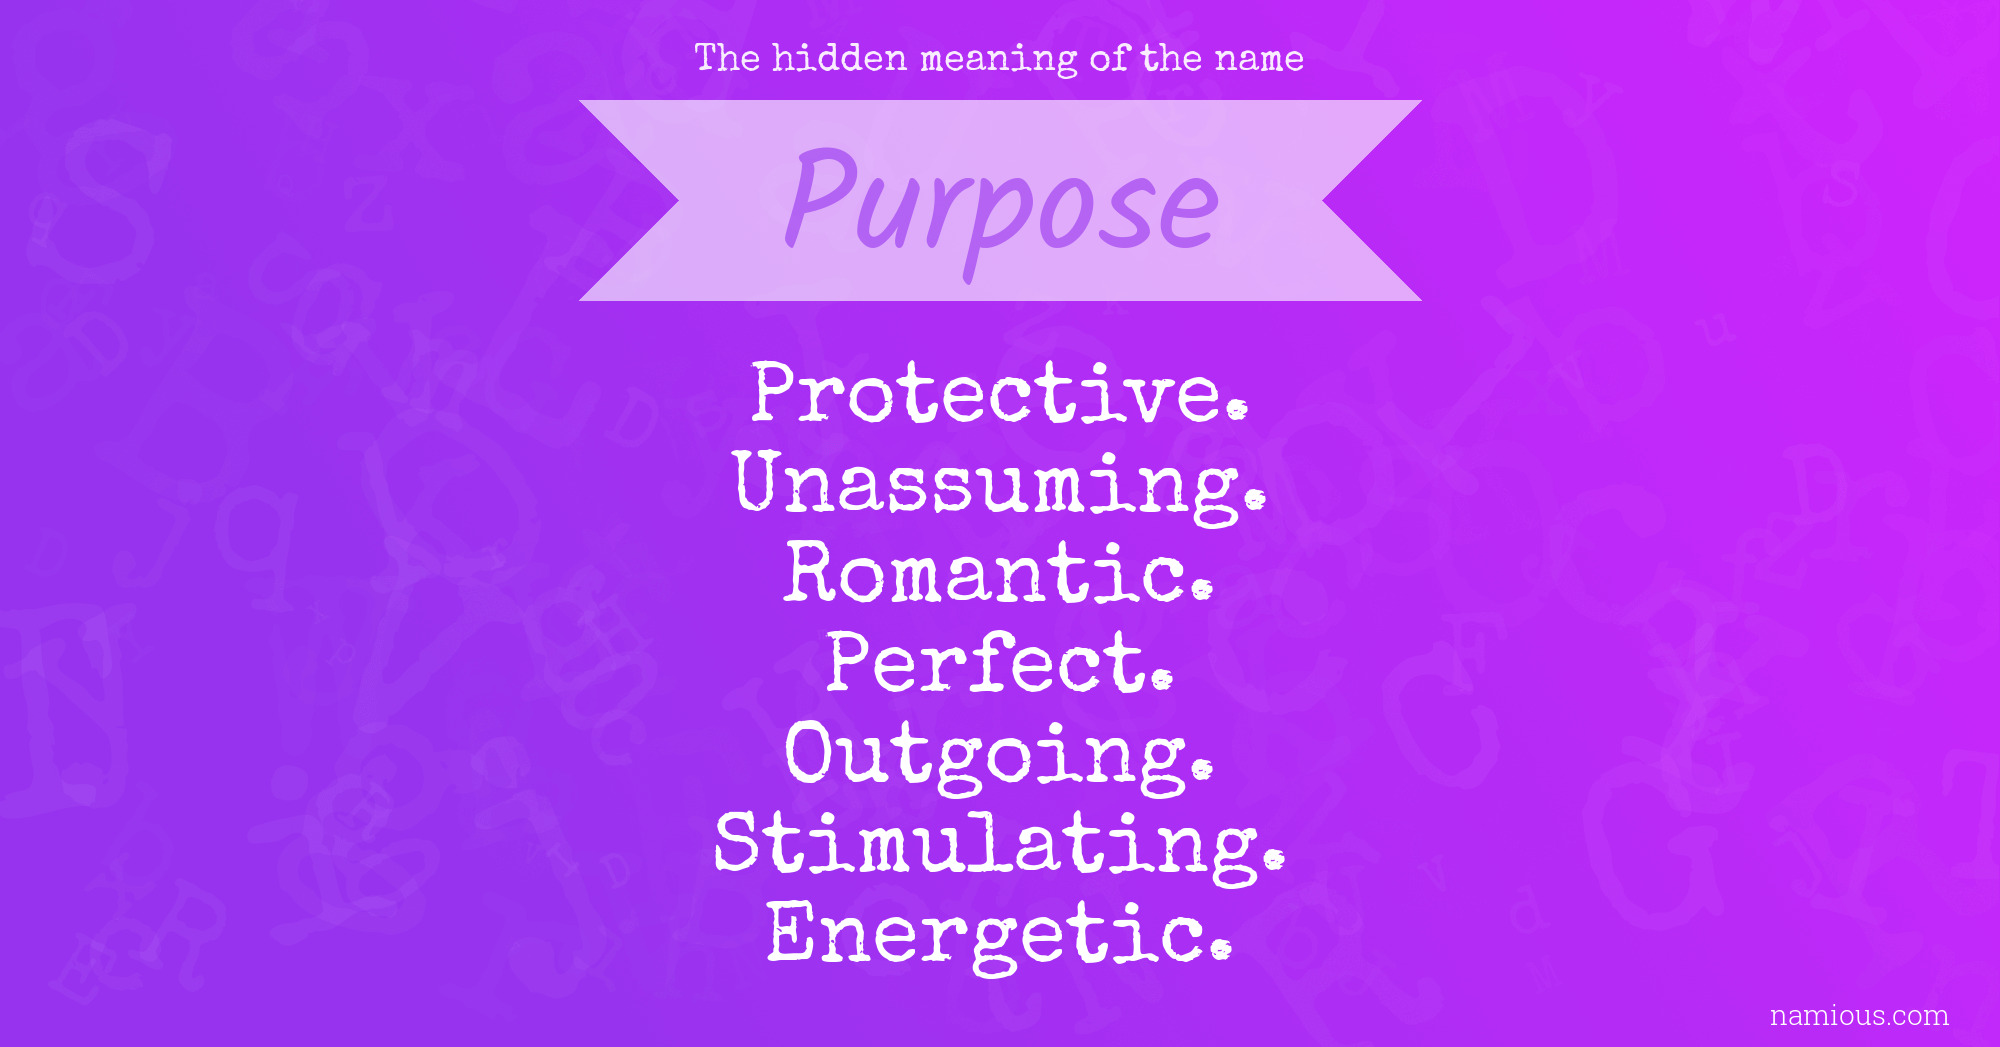 The hidden meaning of the name Purpose